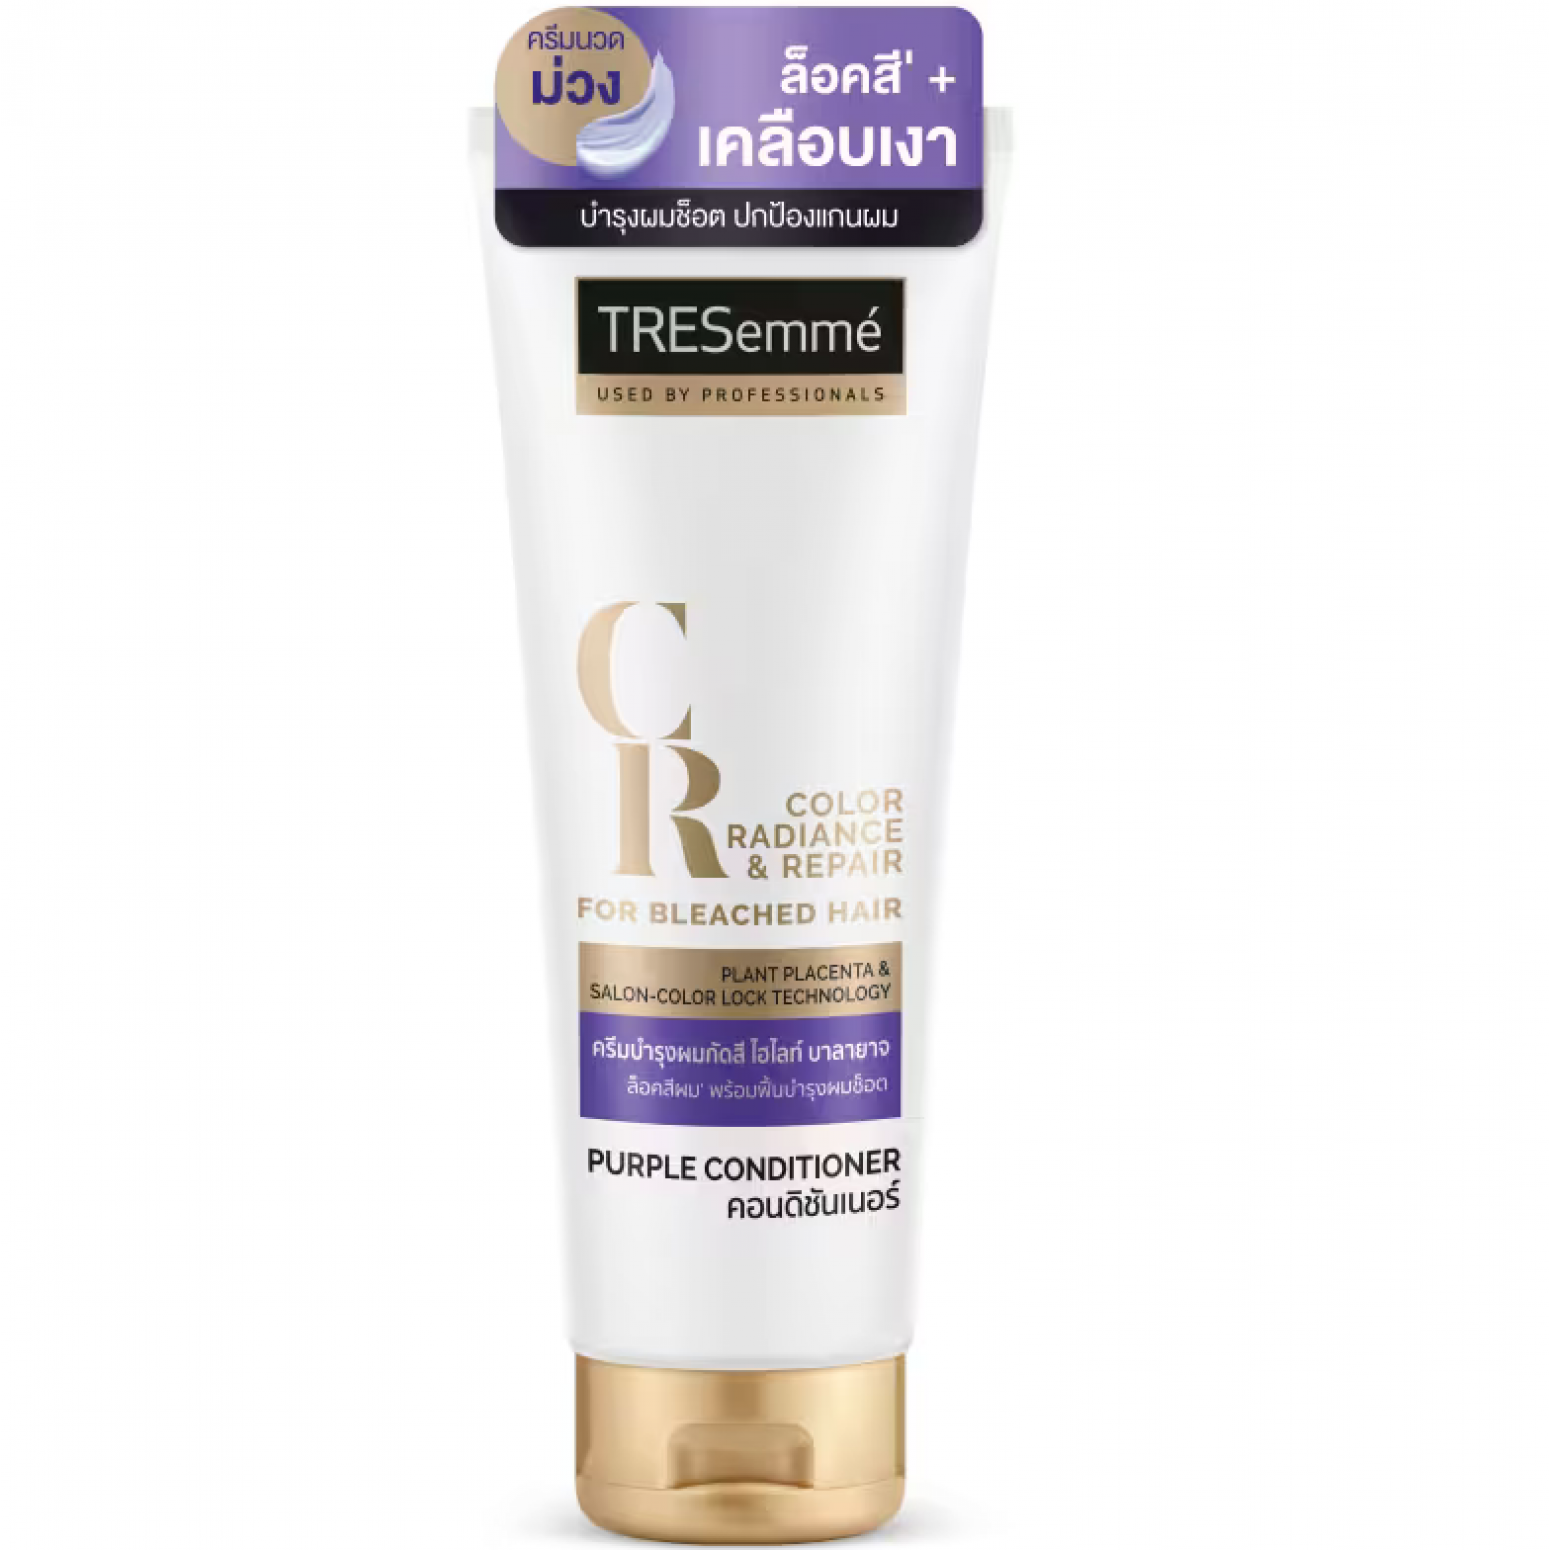 Tresemme Color Radiance and Repair Hair Conditioner 220ml.